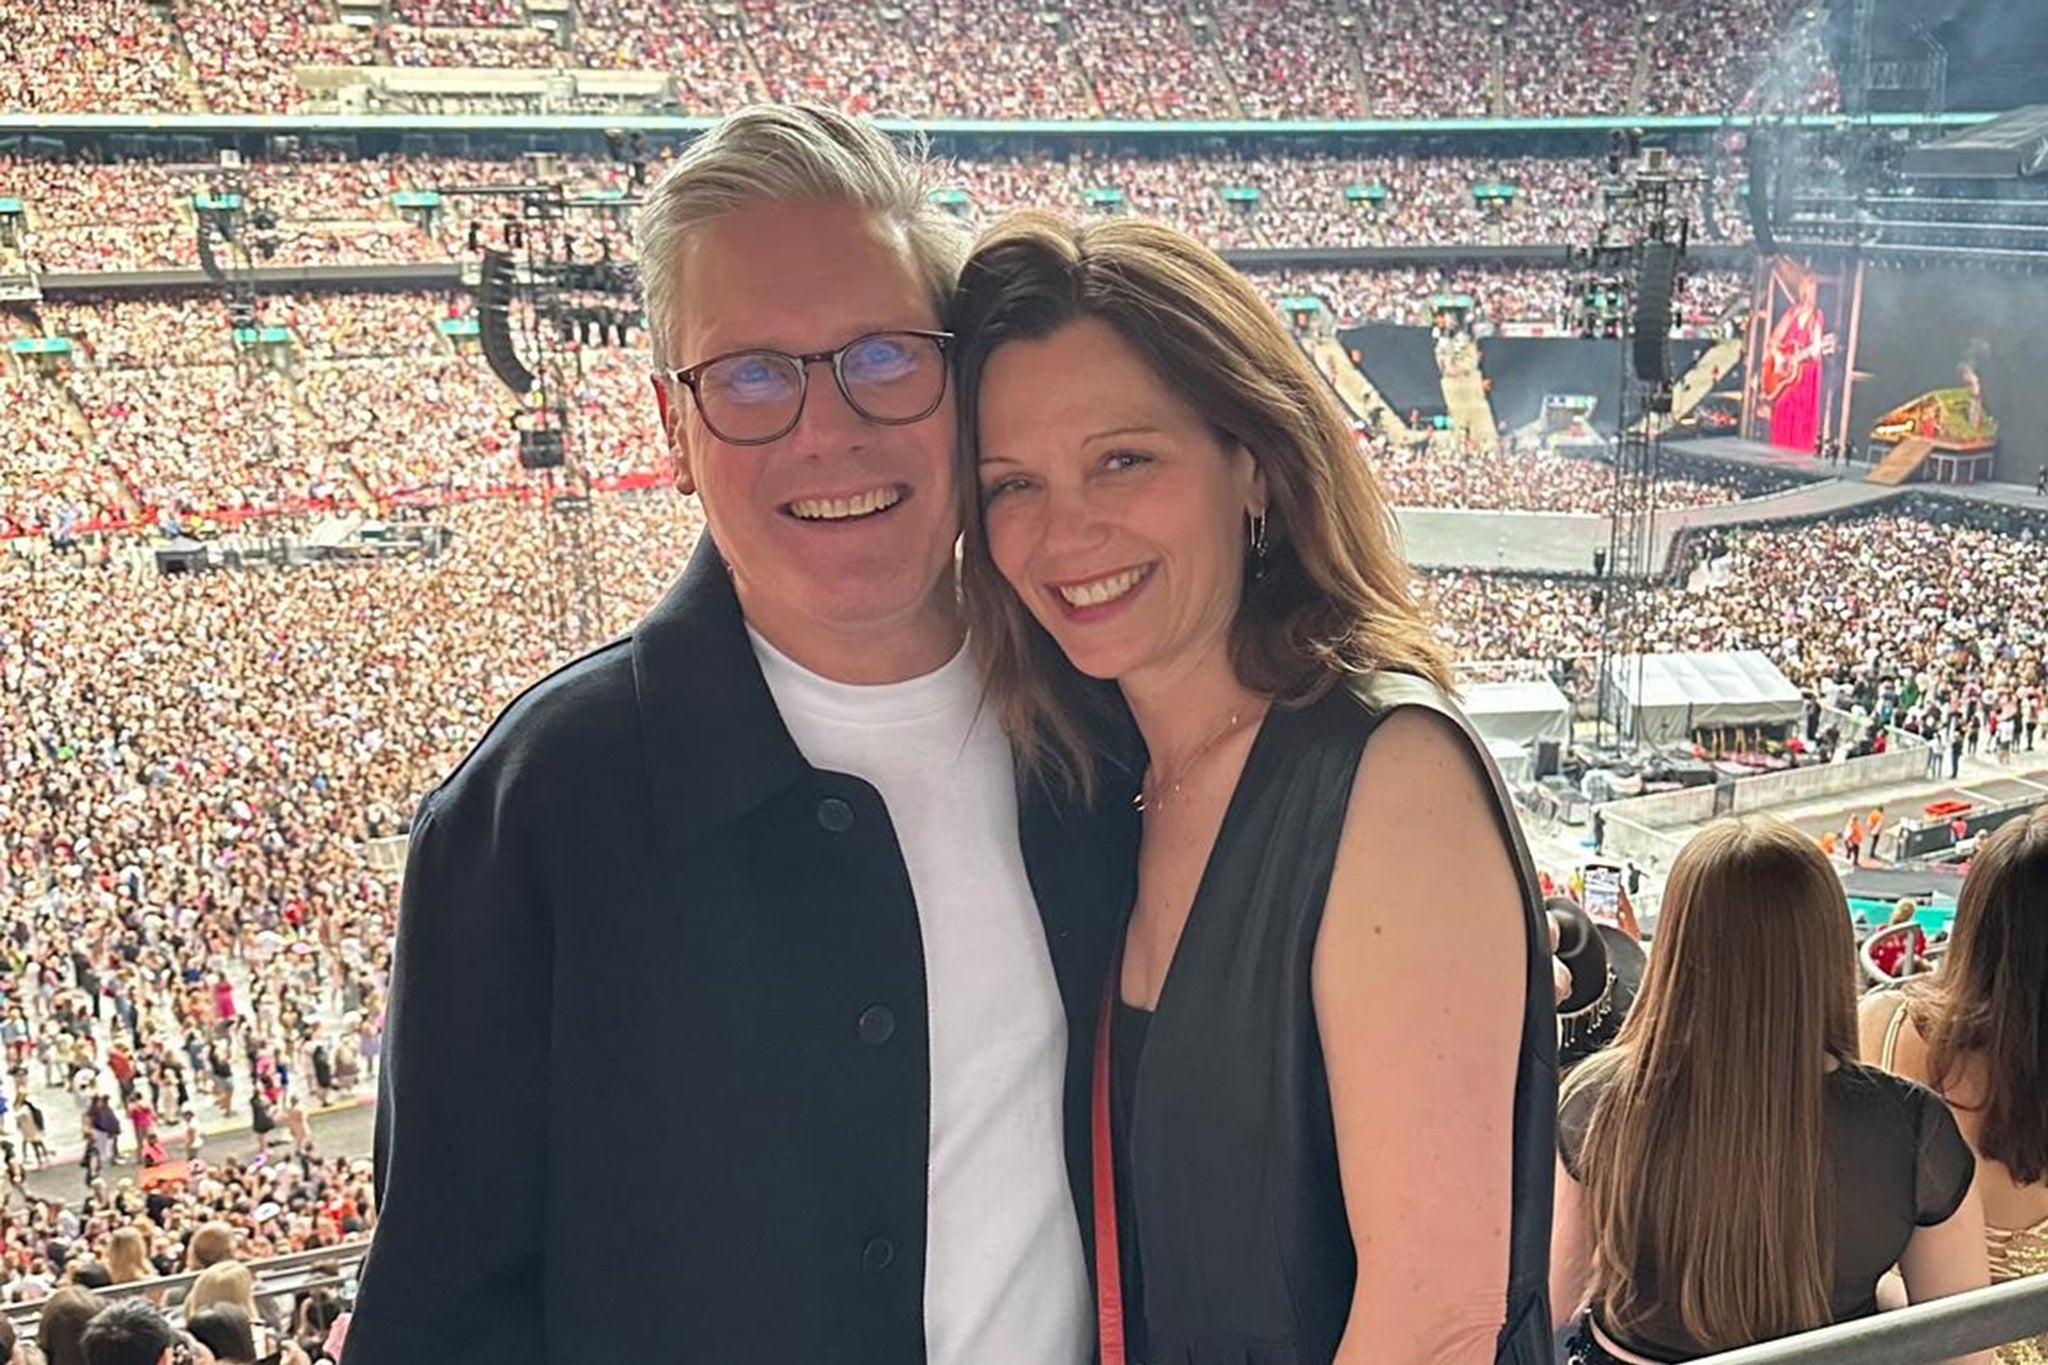 The photo that ‘tells you everything’: Keir Starmer at a Taylor Swift concert with his wife Victoria, who he says brings out the best in him